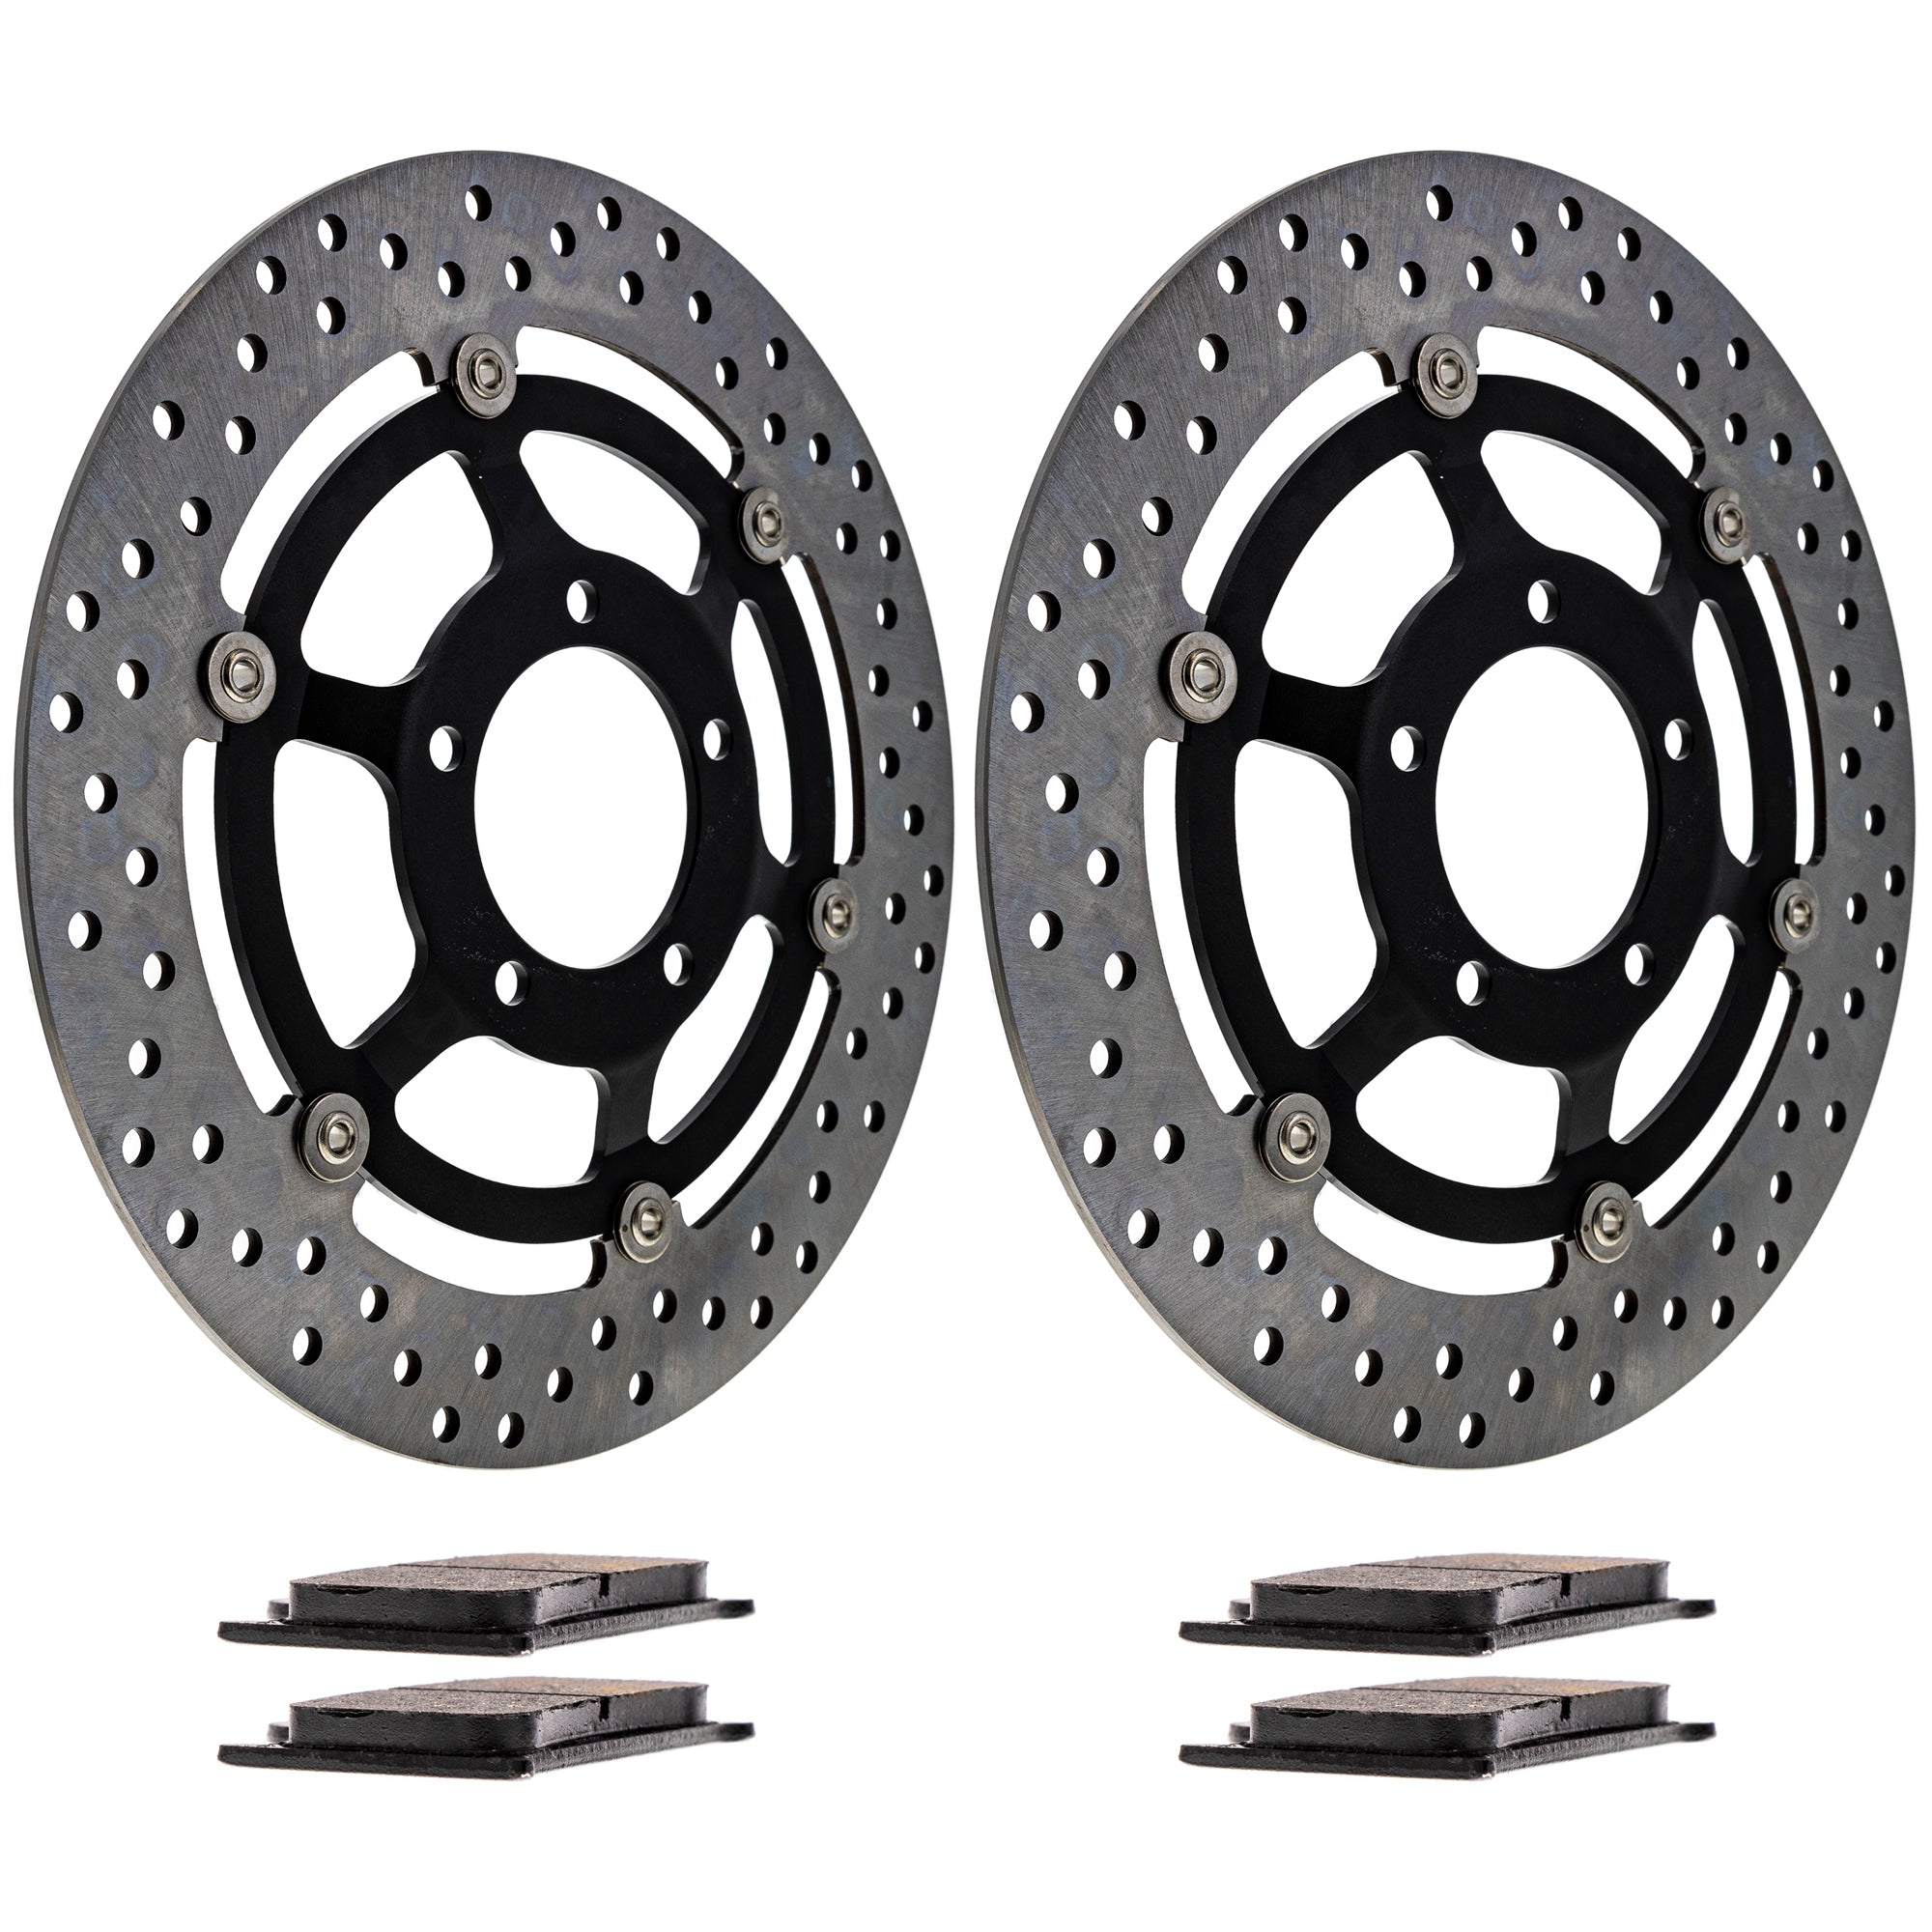 Front Brake Rotors and Pads Kit for Polaris GEM T2020393 T2020245 T2020553 T2020211 NICHE MK1007380